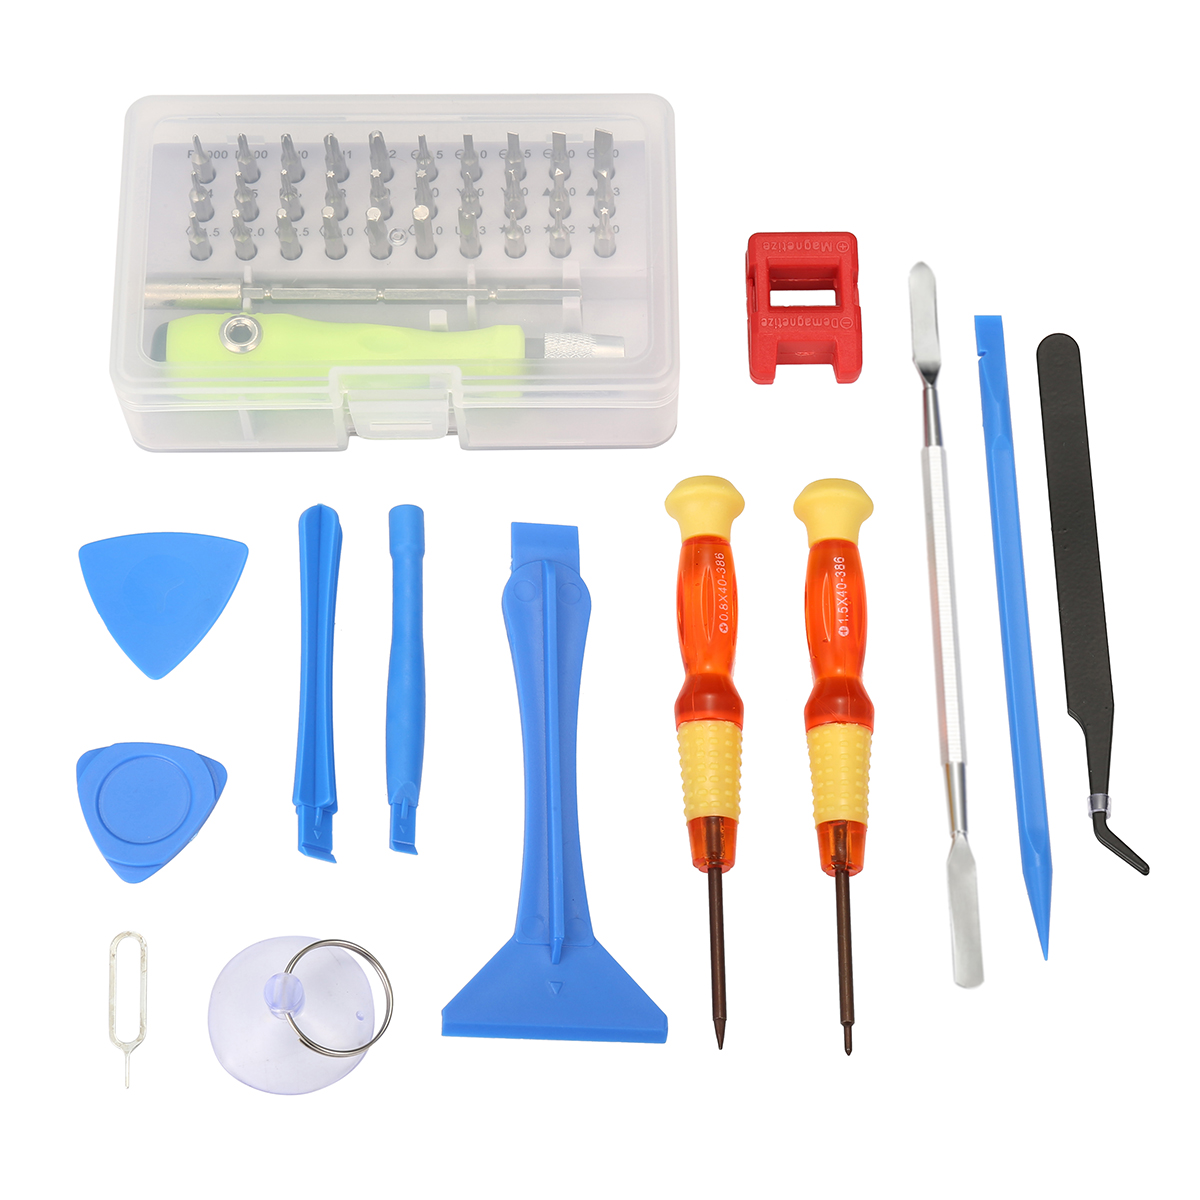 

52 Piece Screwdriver Package Includes A 32-in-1 Screwdriver Case and M obile Phone Maintenance Tools